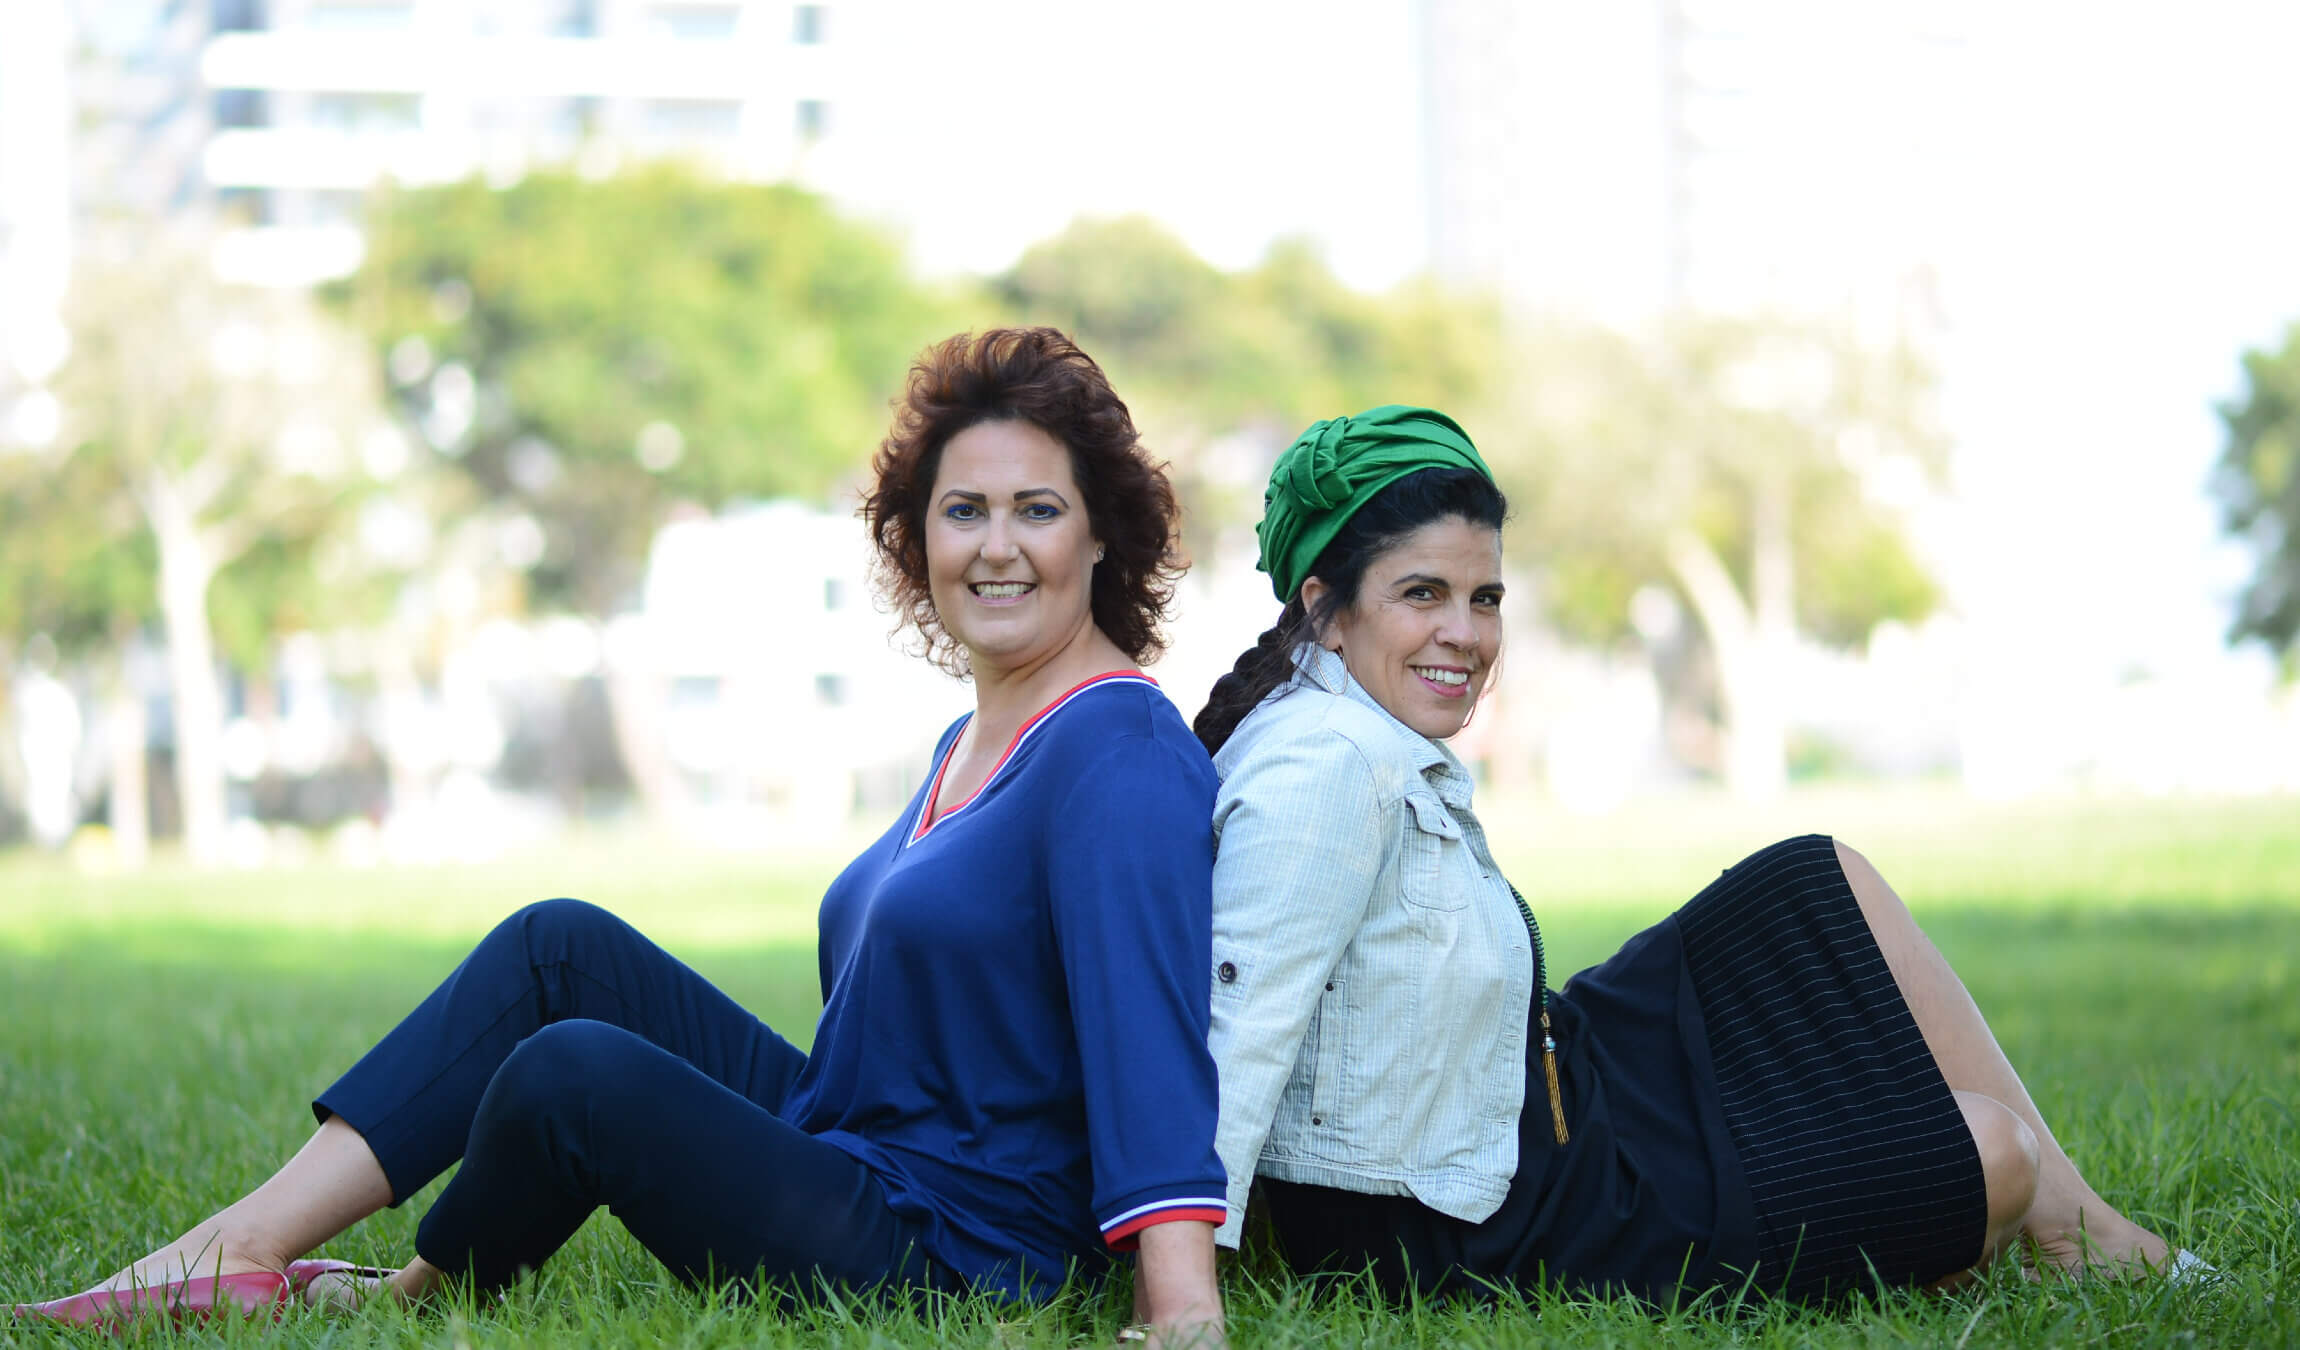 Limor Eisner, left, received a kidney from Evelyn Hazut, right, through Matnat Chaim, an Israeli nonprofit that encourages people to donate organs while they are alive and well.